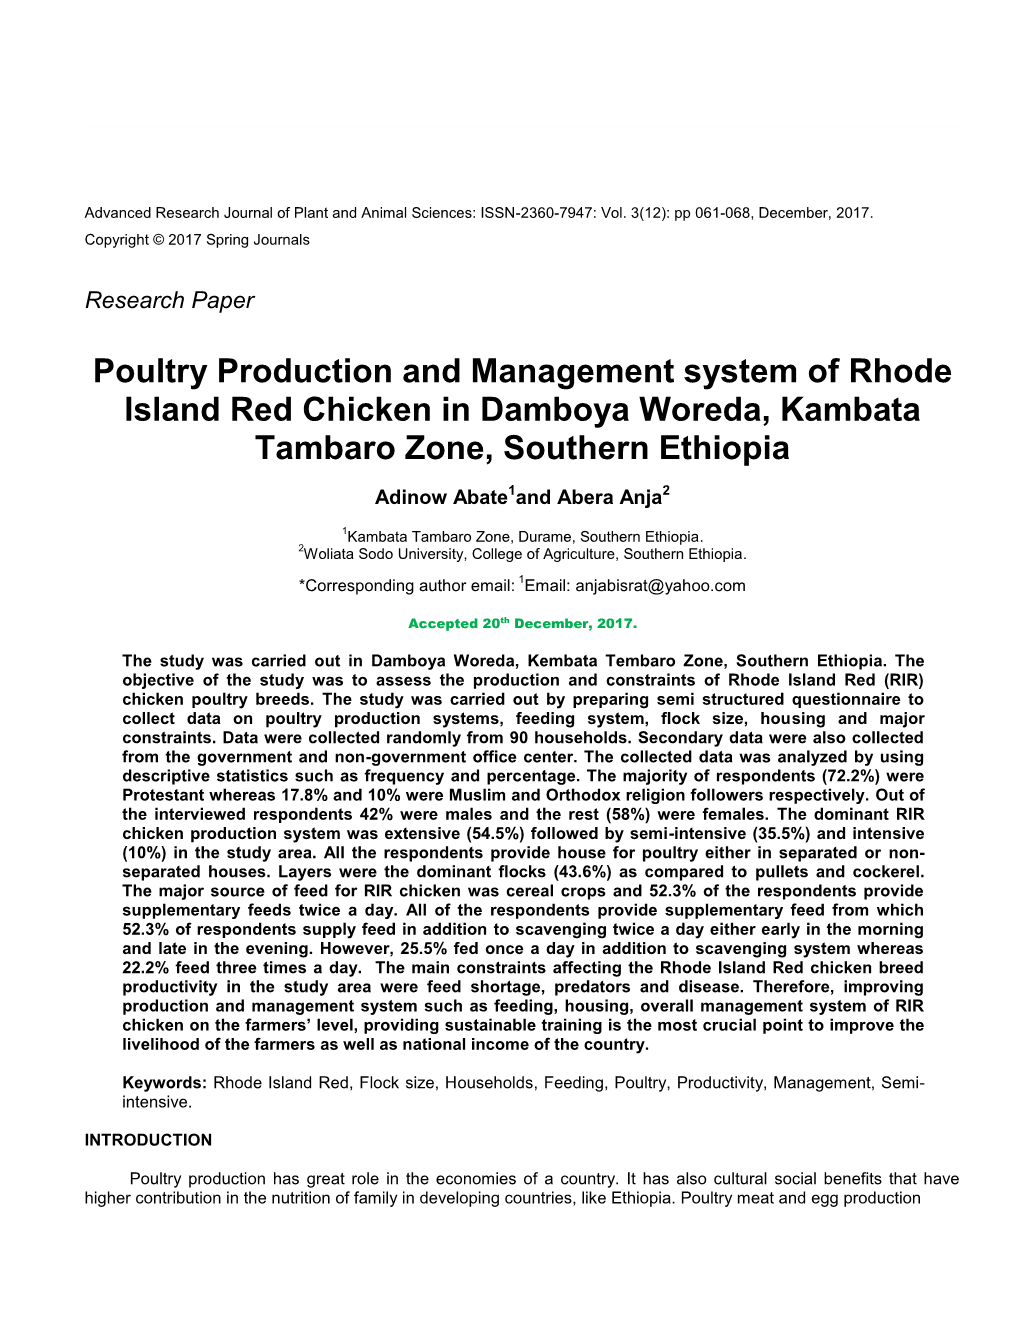 Poultry Production and Management System of Rhode Island Red Chicken in Damboya Woreda, Kambata Tambaro Zone, Southern Ethiopia